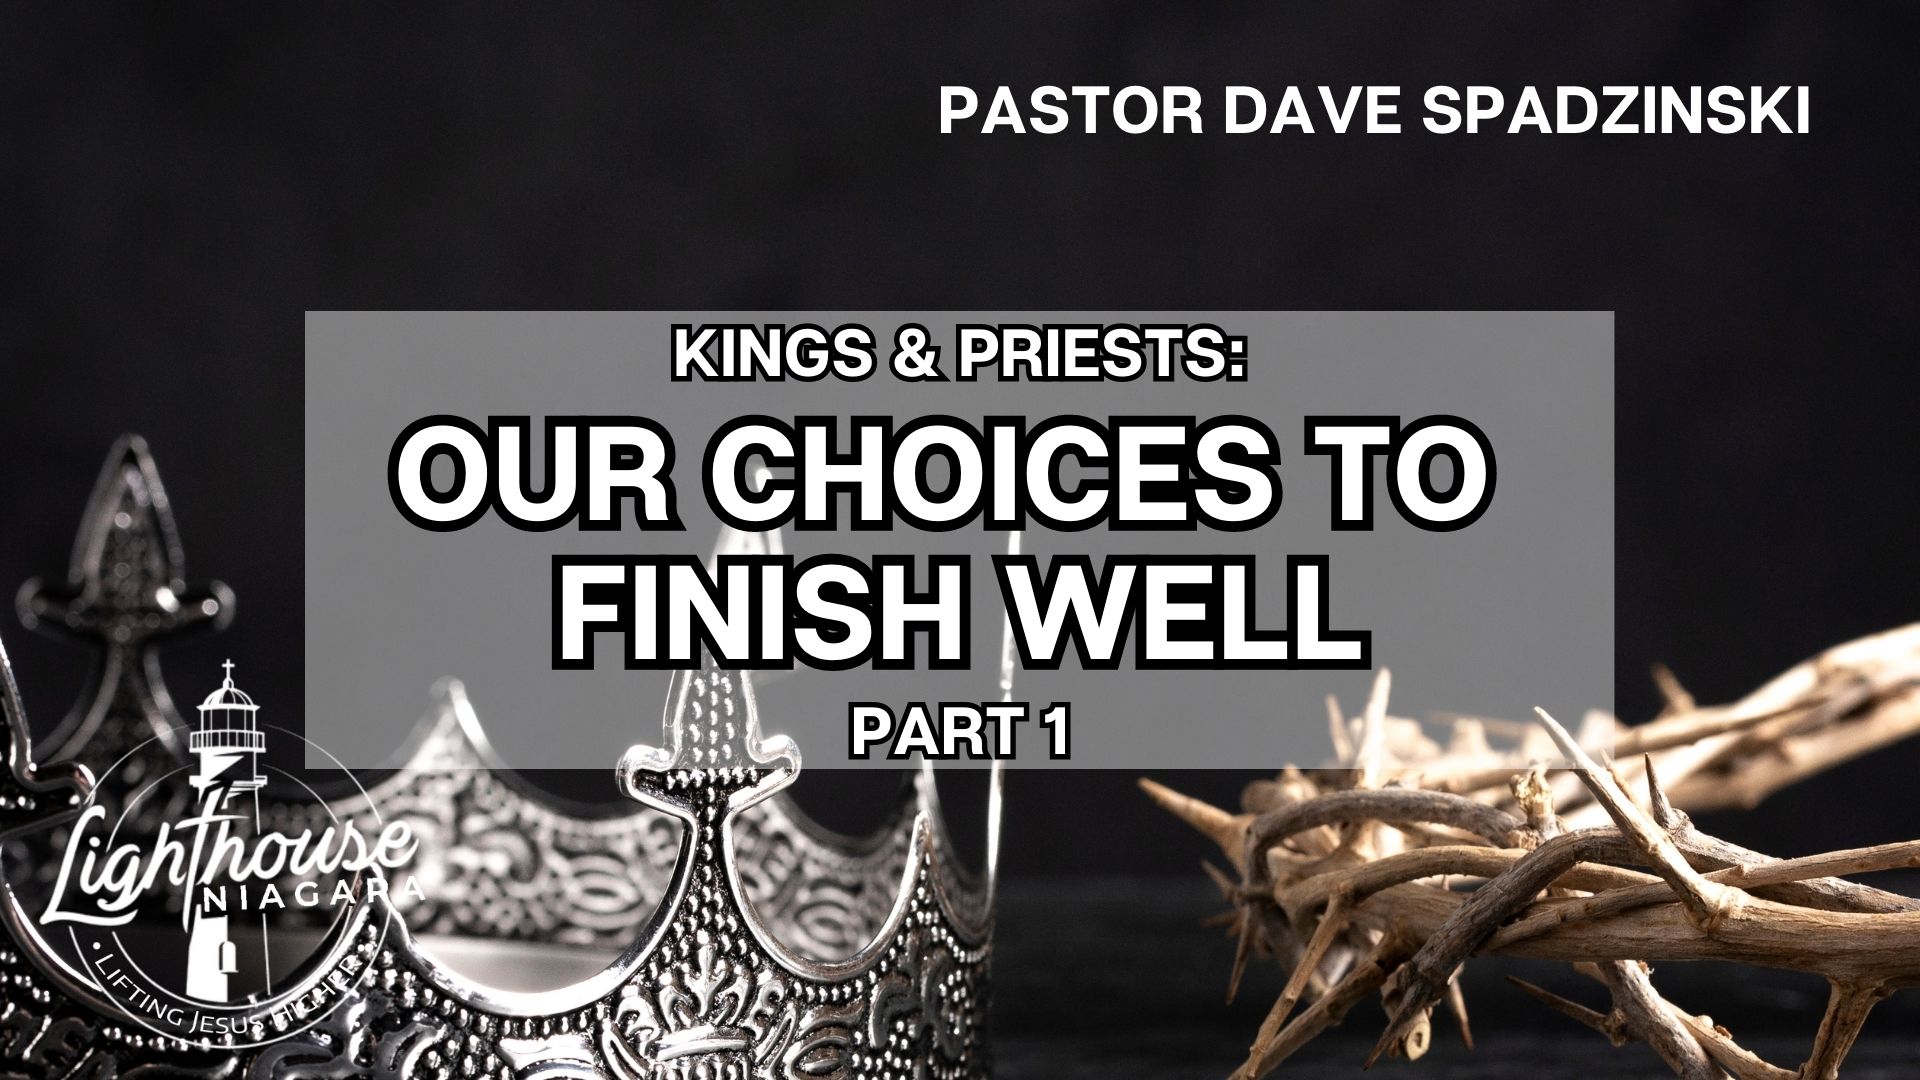 Kings & Priests: Our Choices To Finish Well - Pastor Dave Spadzinski